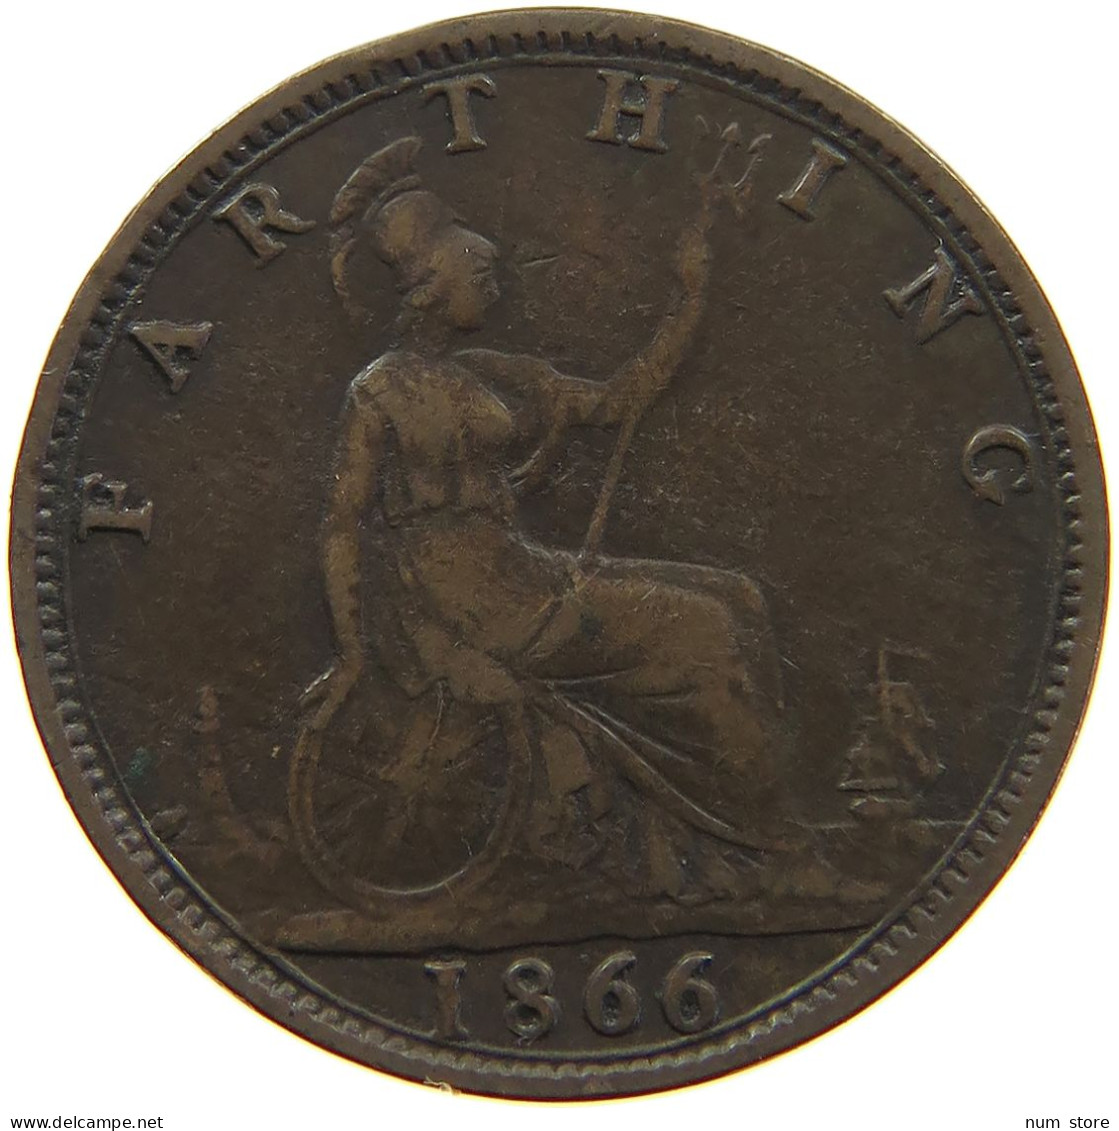 GREAT BRITAIN FARTHING 1866 Victoria 1837-1901 #a085 0633